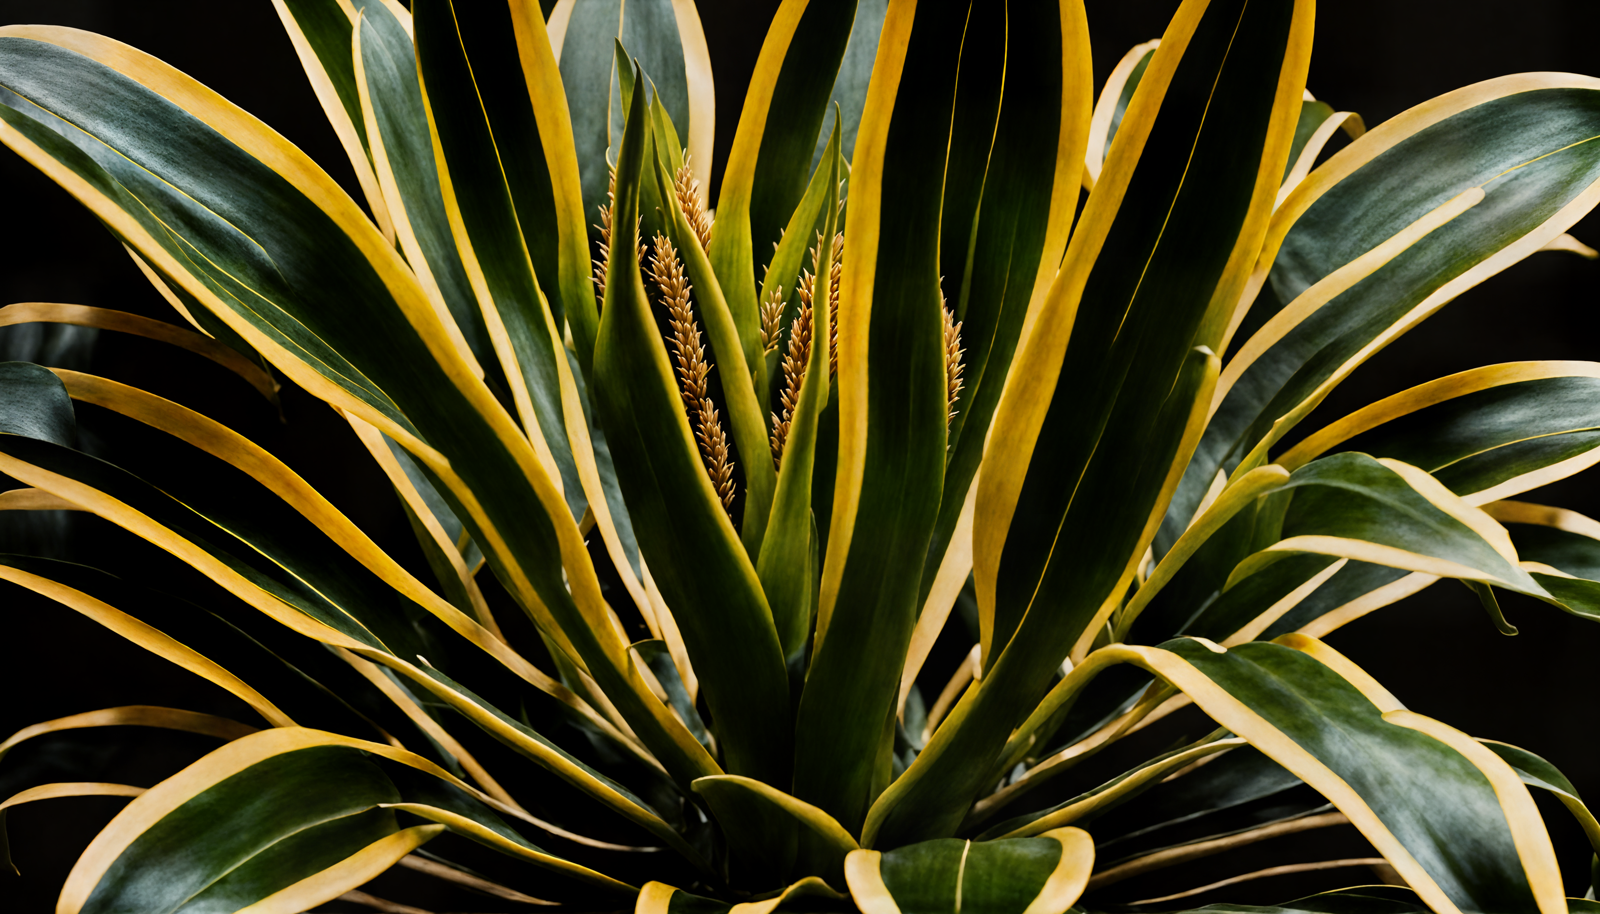 Agave americana in a planter, detailed leaves, clear lighting, against a dark background.